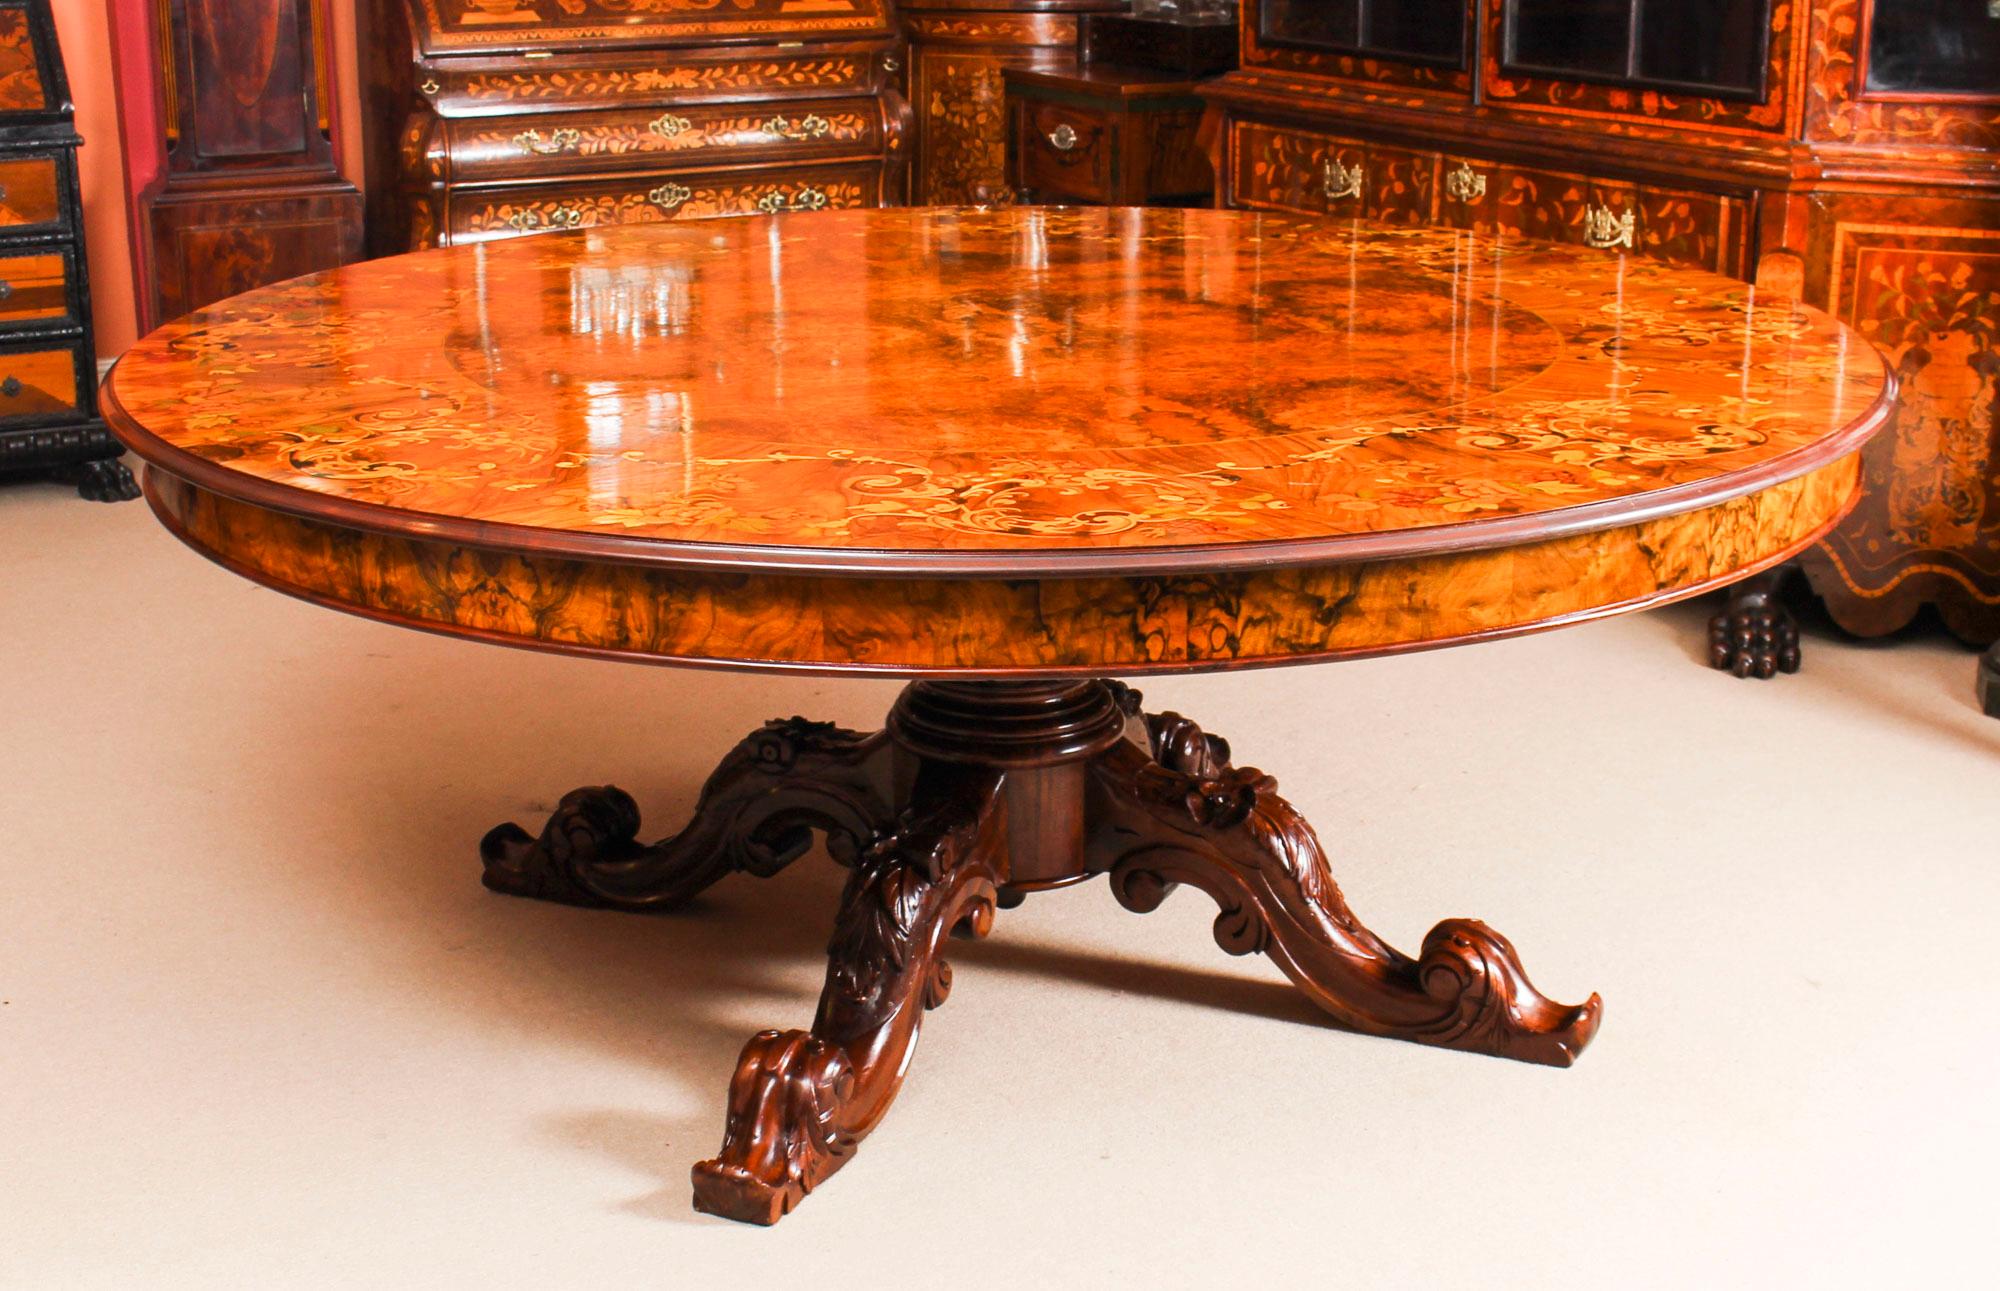 A beautiful large 200 cm diameter dining table that can seat ten in comfort, dating from the mid-20th century.

It is of fabulous quality and in excellent condition. It is highly desirable to have large round tables for dinner parties as all the